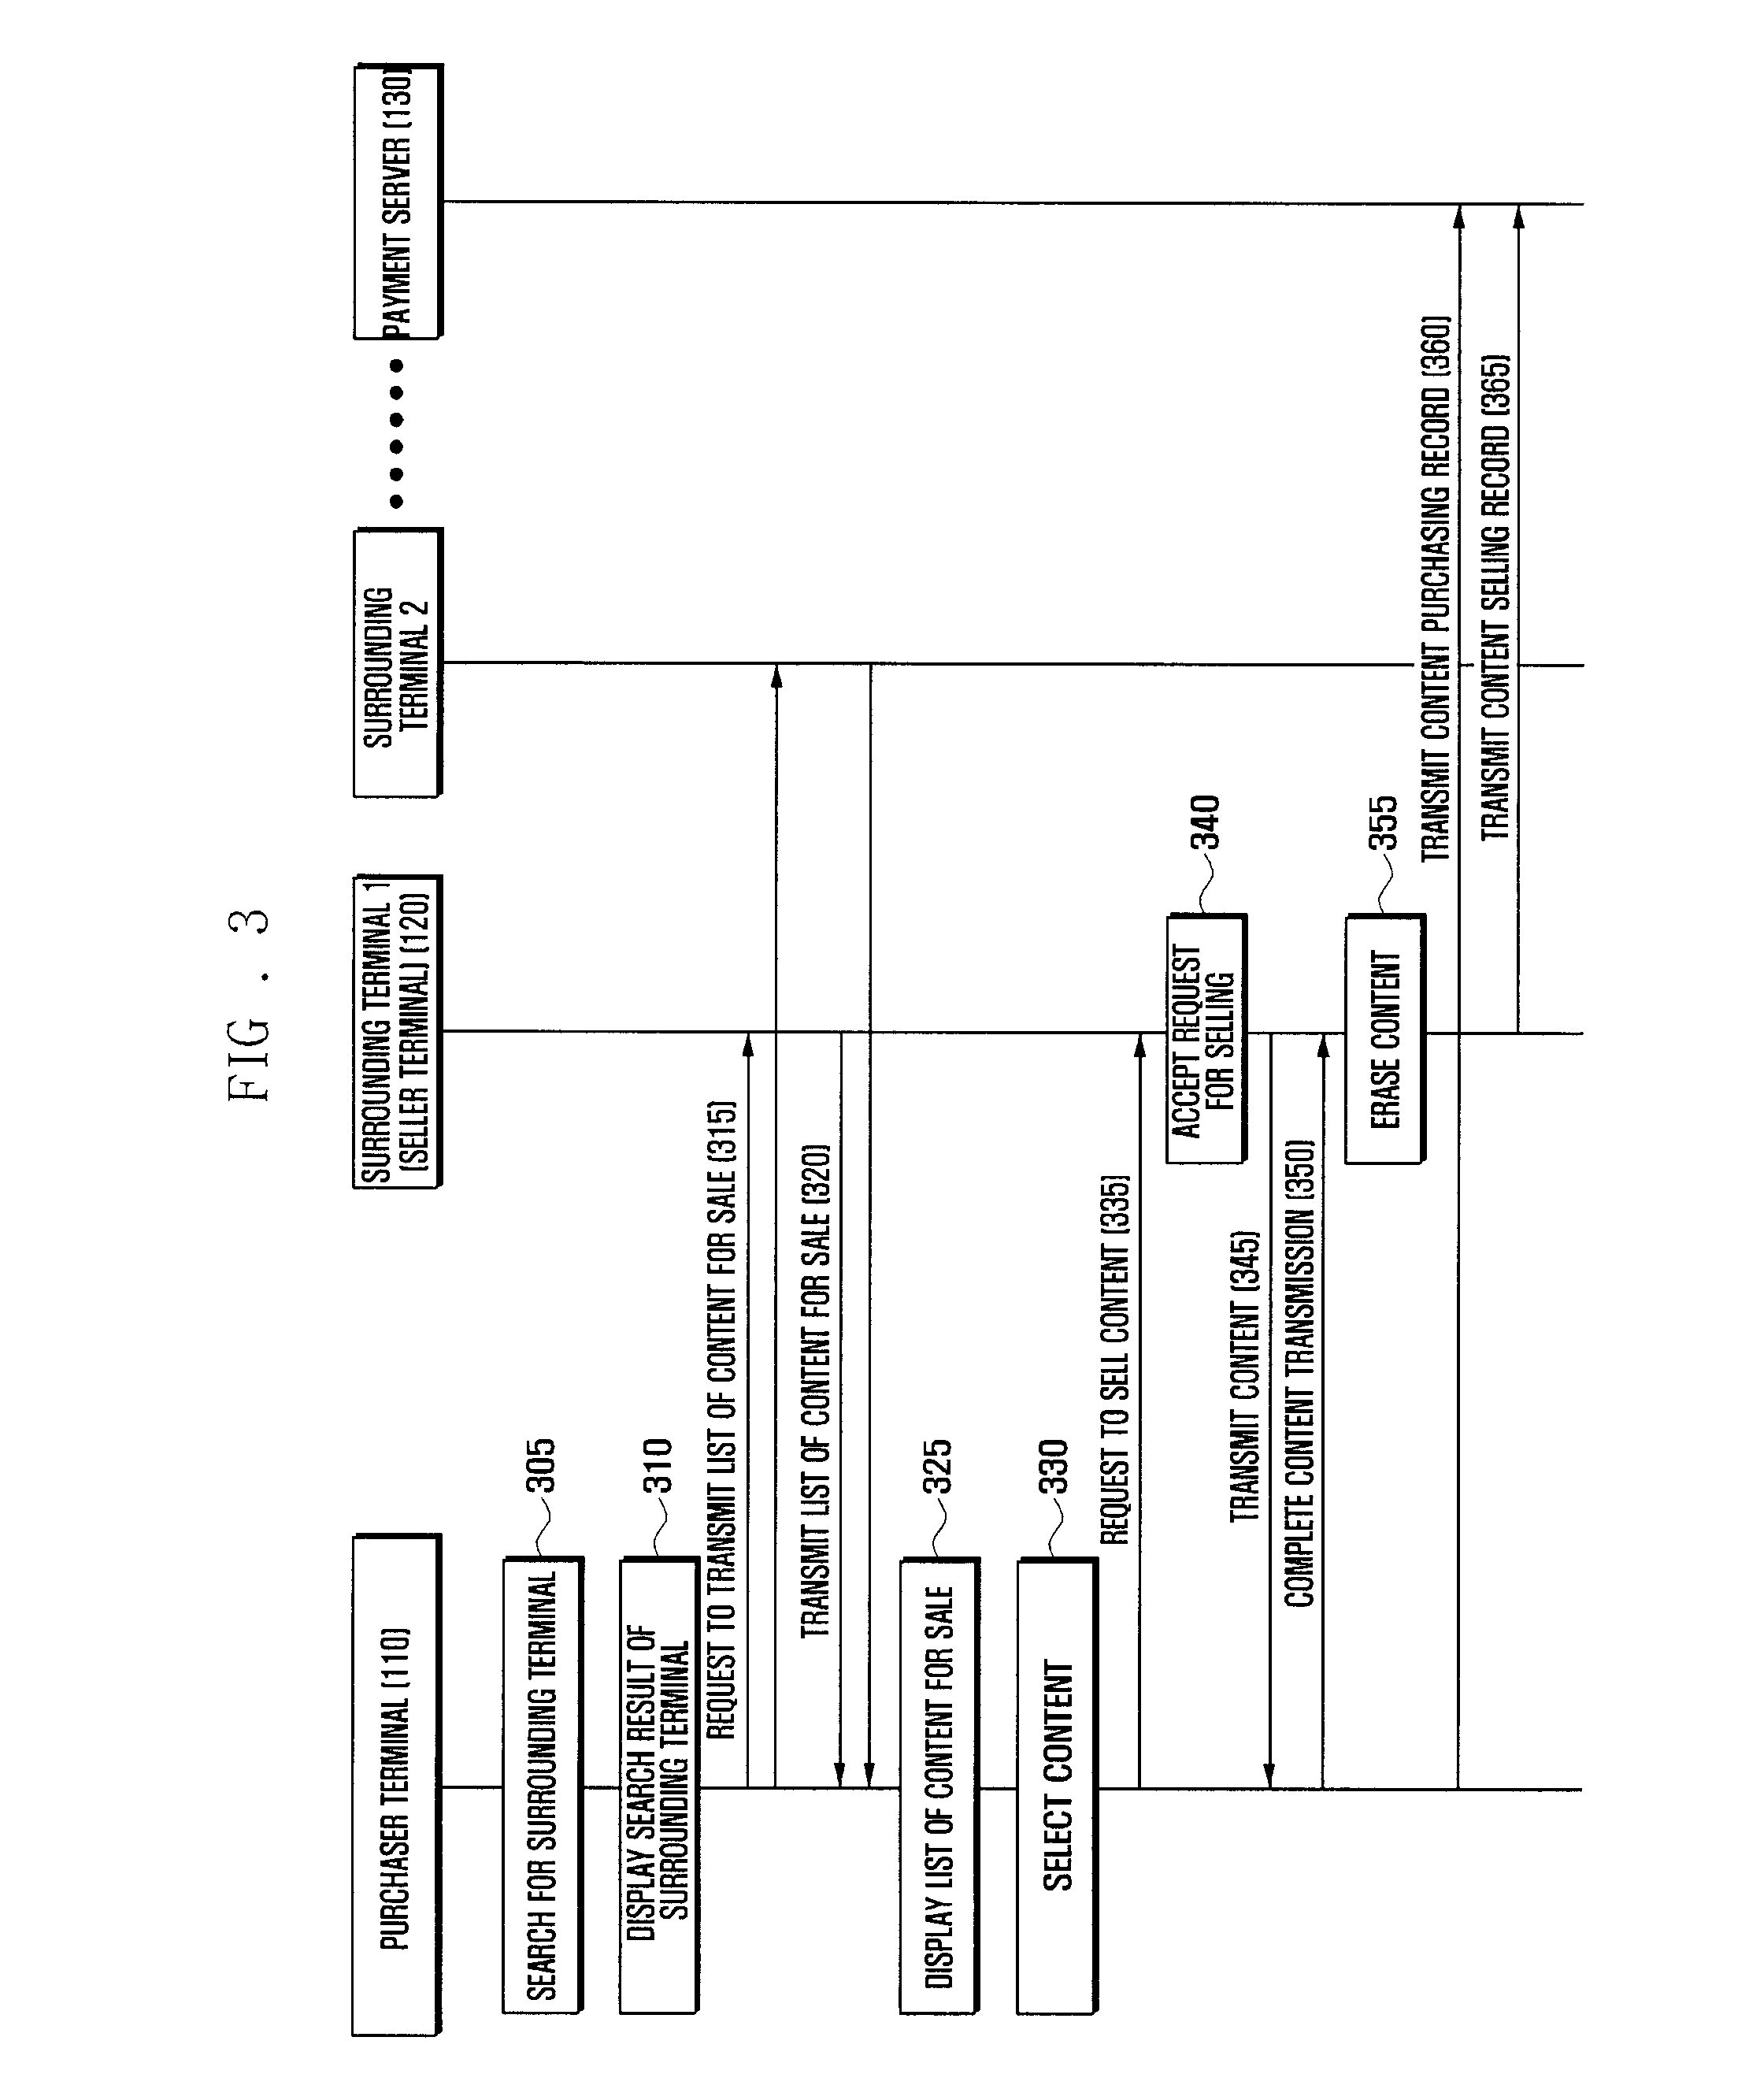 Content transaction method and system